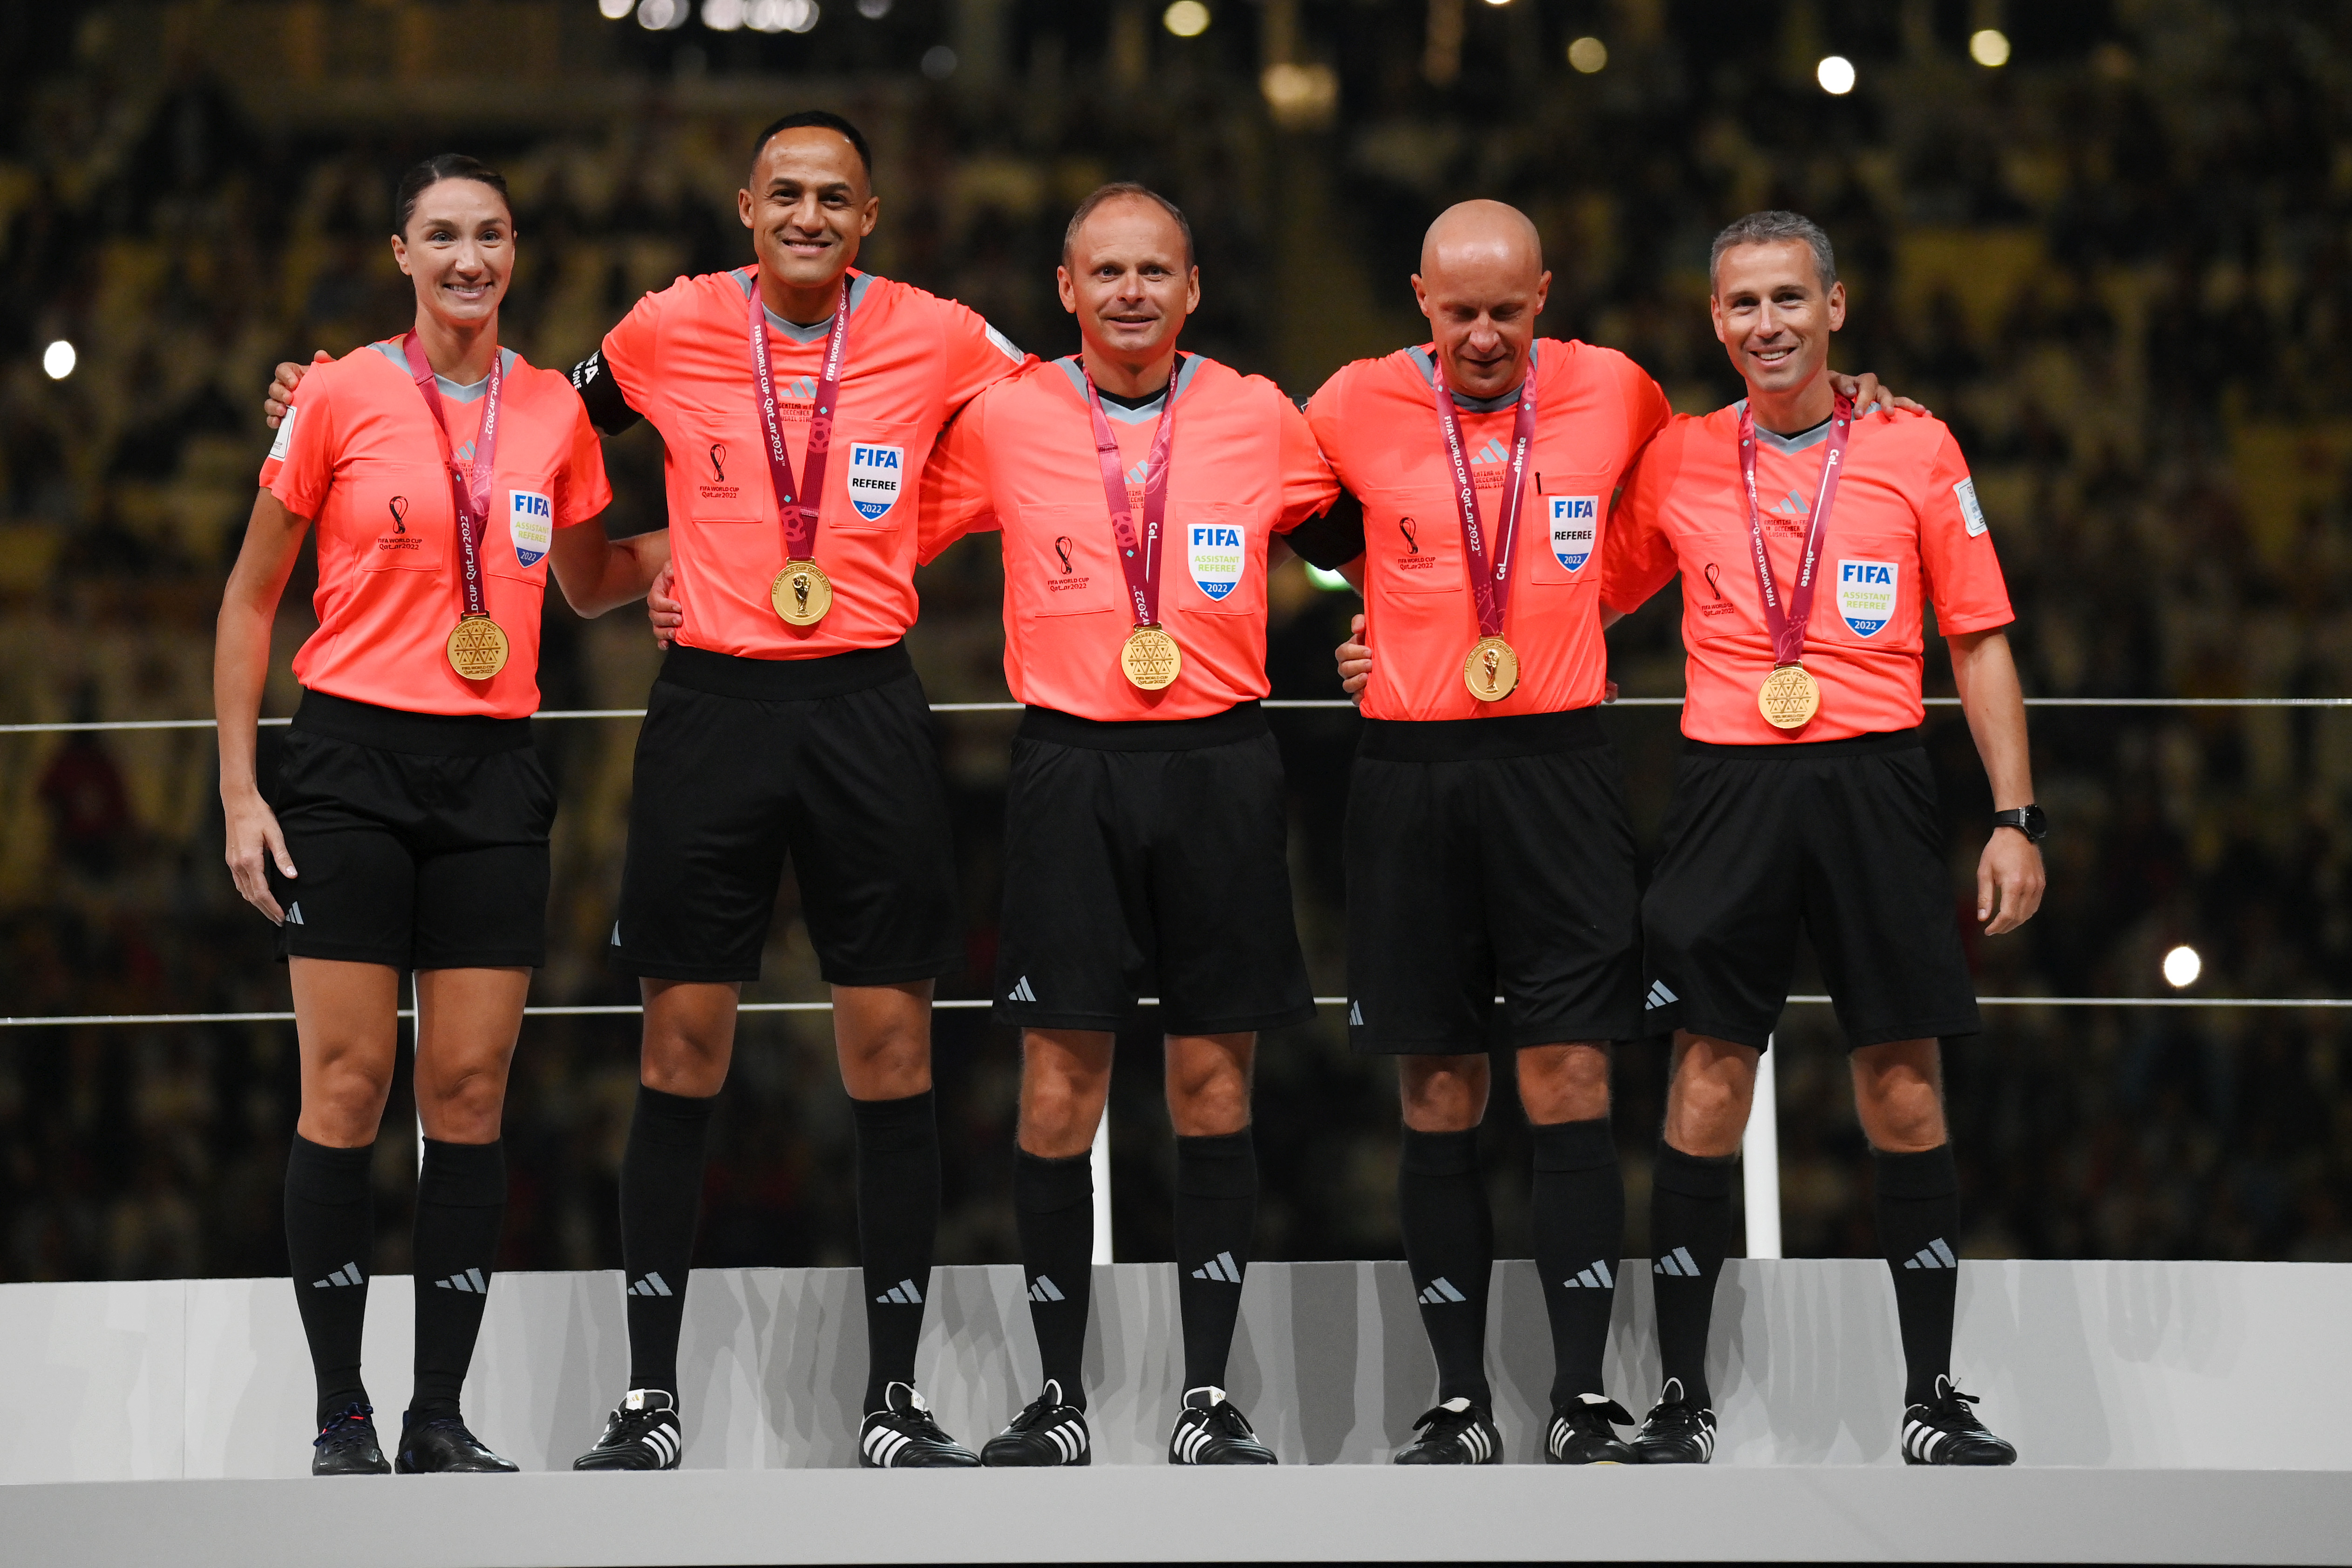 Milestones far and wide for Concacaf referees at Qatar 2022